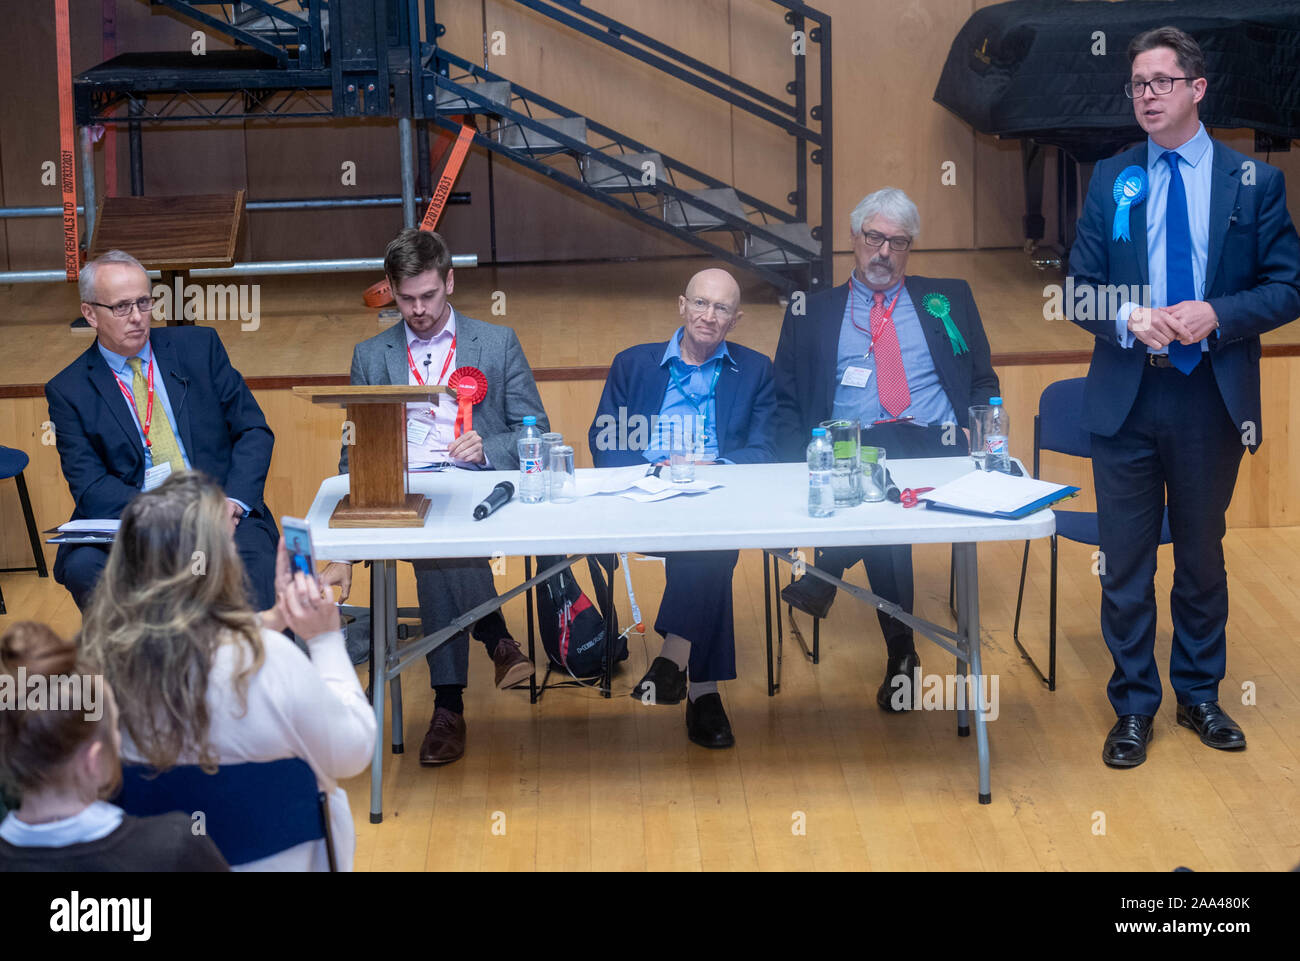 Brentwood Essex UK 19th Nov. 2019 General Election 2109 Brentwood General Election campaign hustings at the elite public Brentwood School Brentwood, Essex   Note: Robin Tilbrook, the English Democrat candidate was not invited to the debate pictured left to right, David Kendall, Liberal democrats, Oliver Durose, the labour party Mike Willis, Brentwood School, chairing the debate, Paul Jeater, Green party, and Alex Burghart, Conservative party  Credit Ian DavidsonAlamy Live News Stock Photo